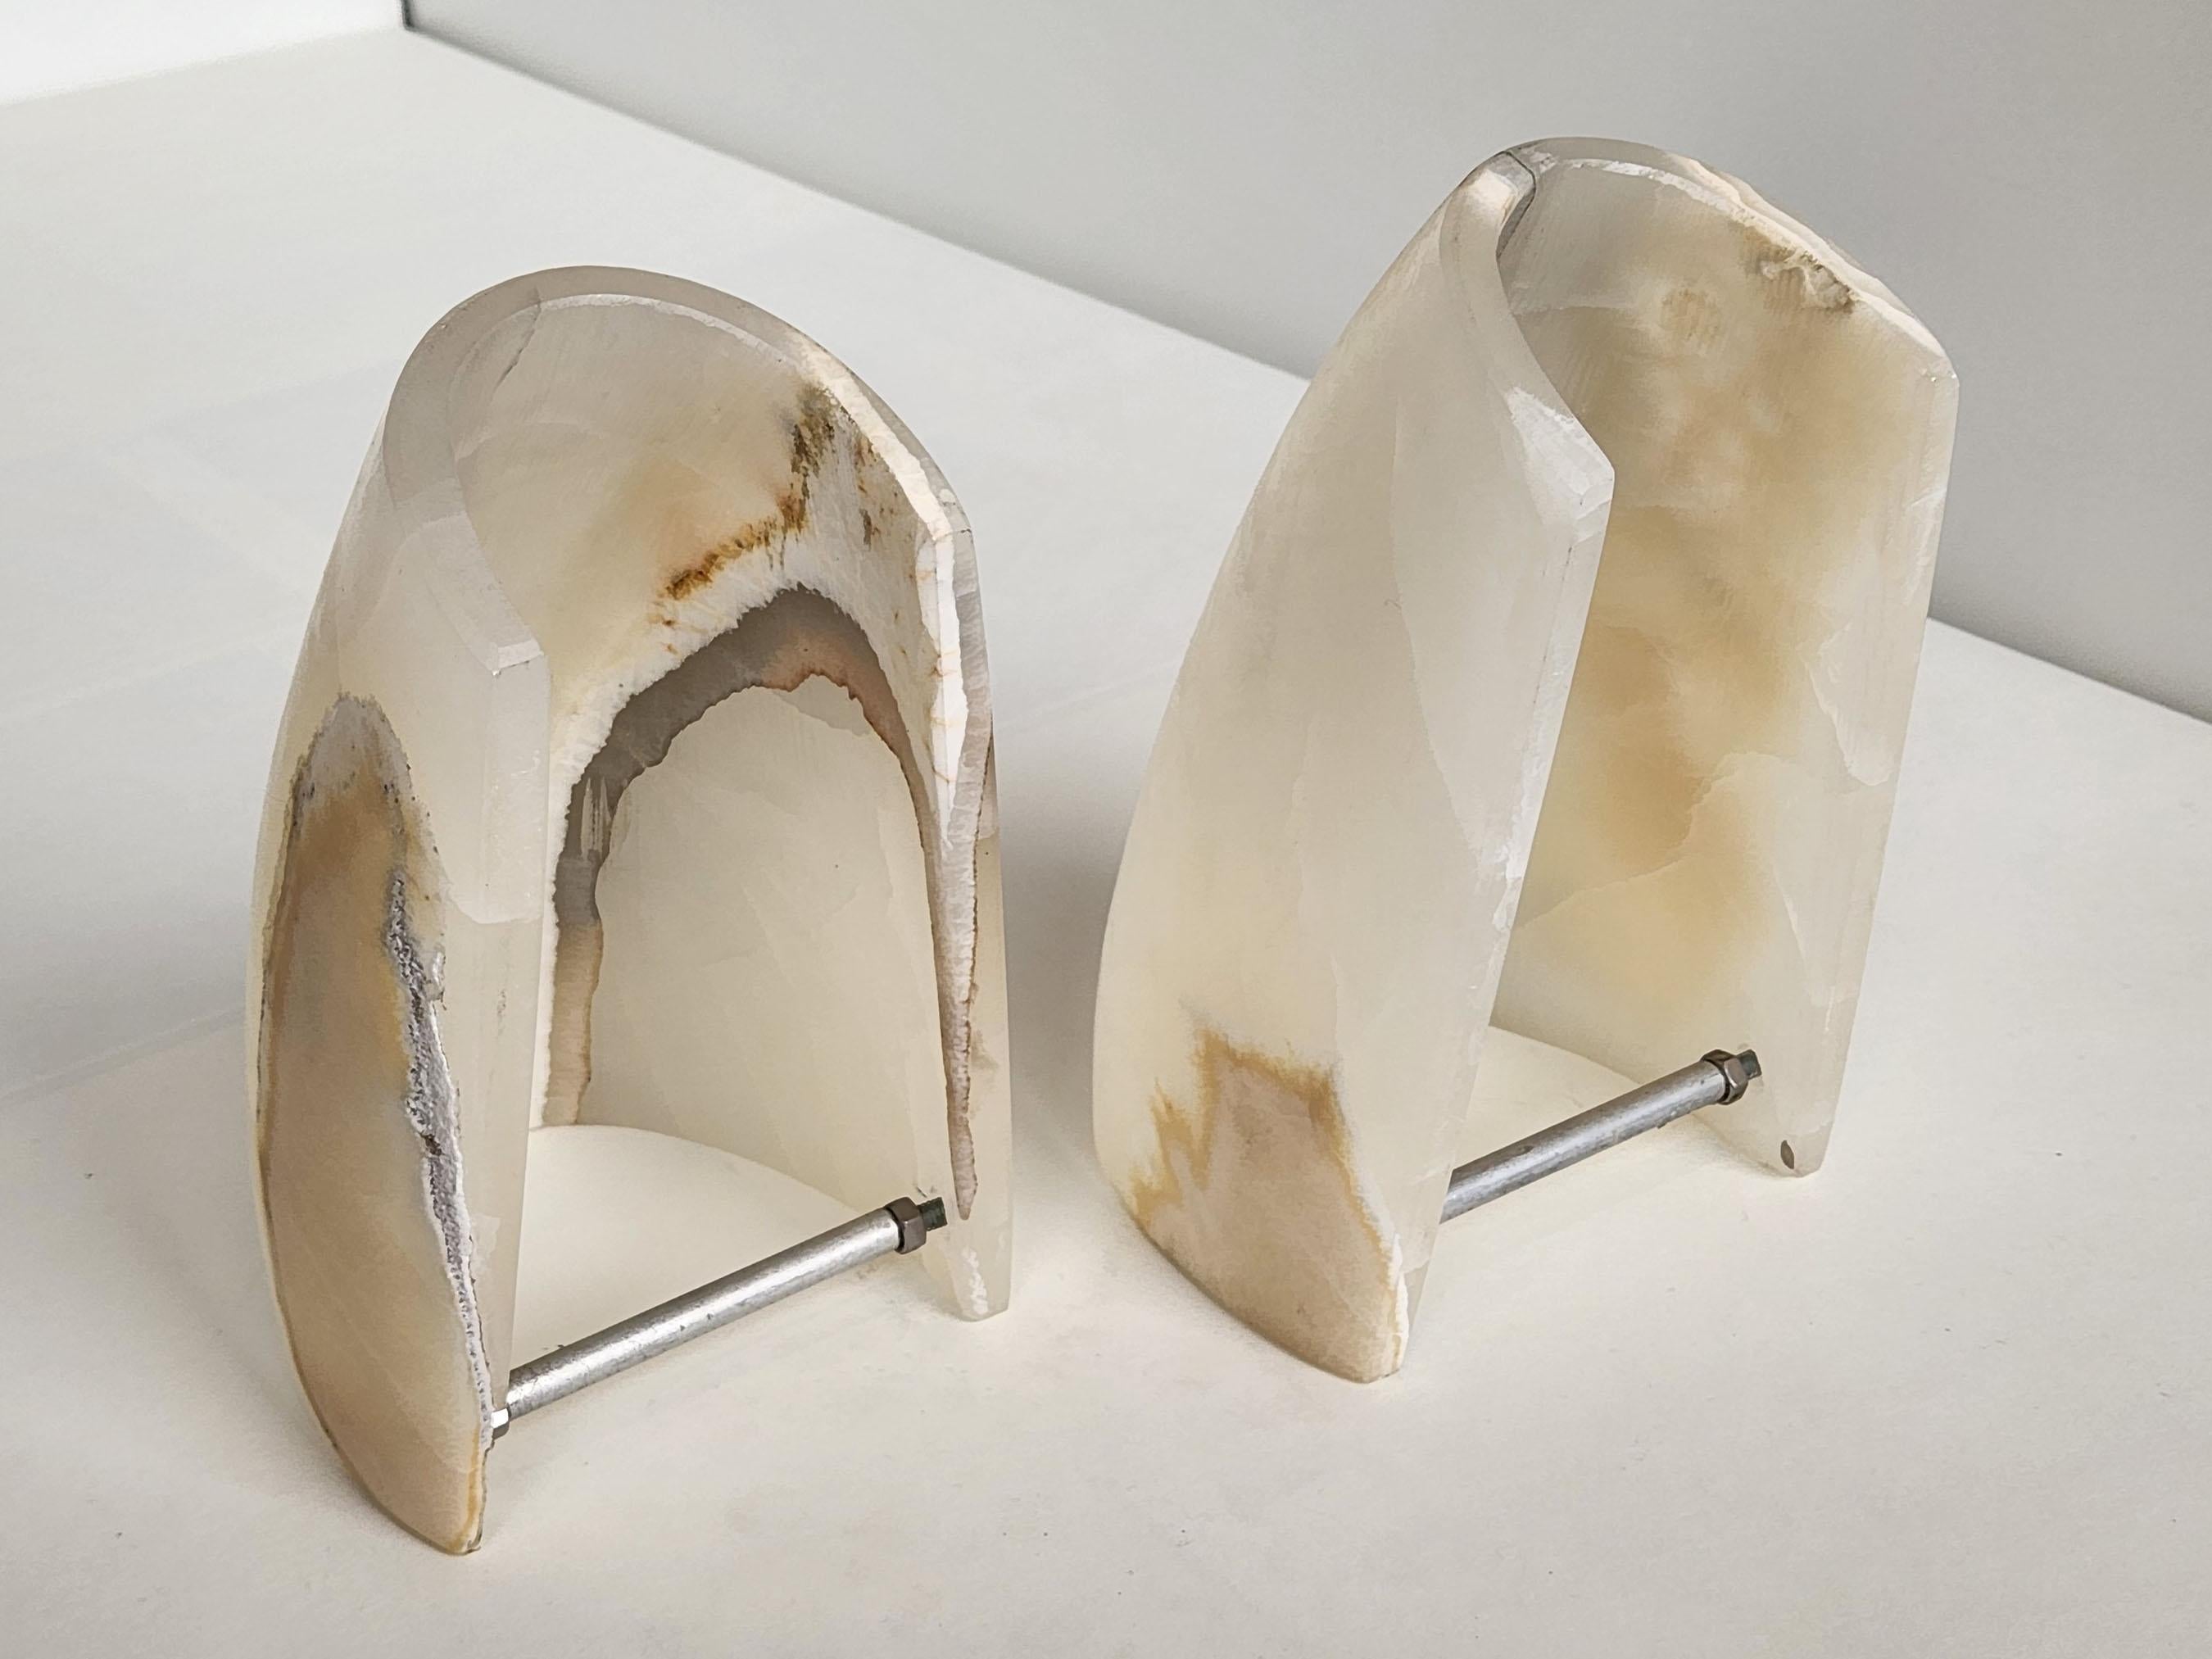 Hand-carved White Onyx Wall Sconces with Natural Dark Veins For Sale 3